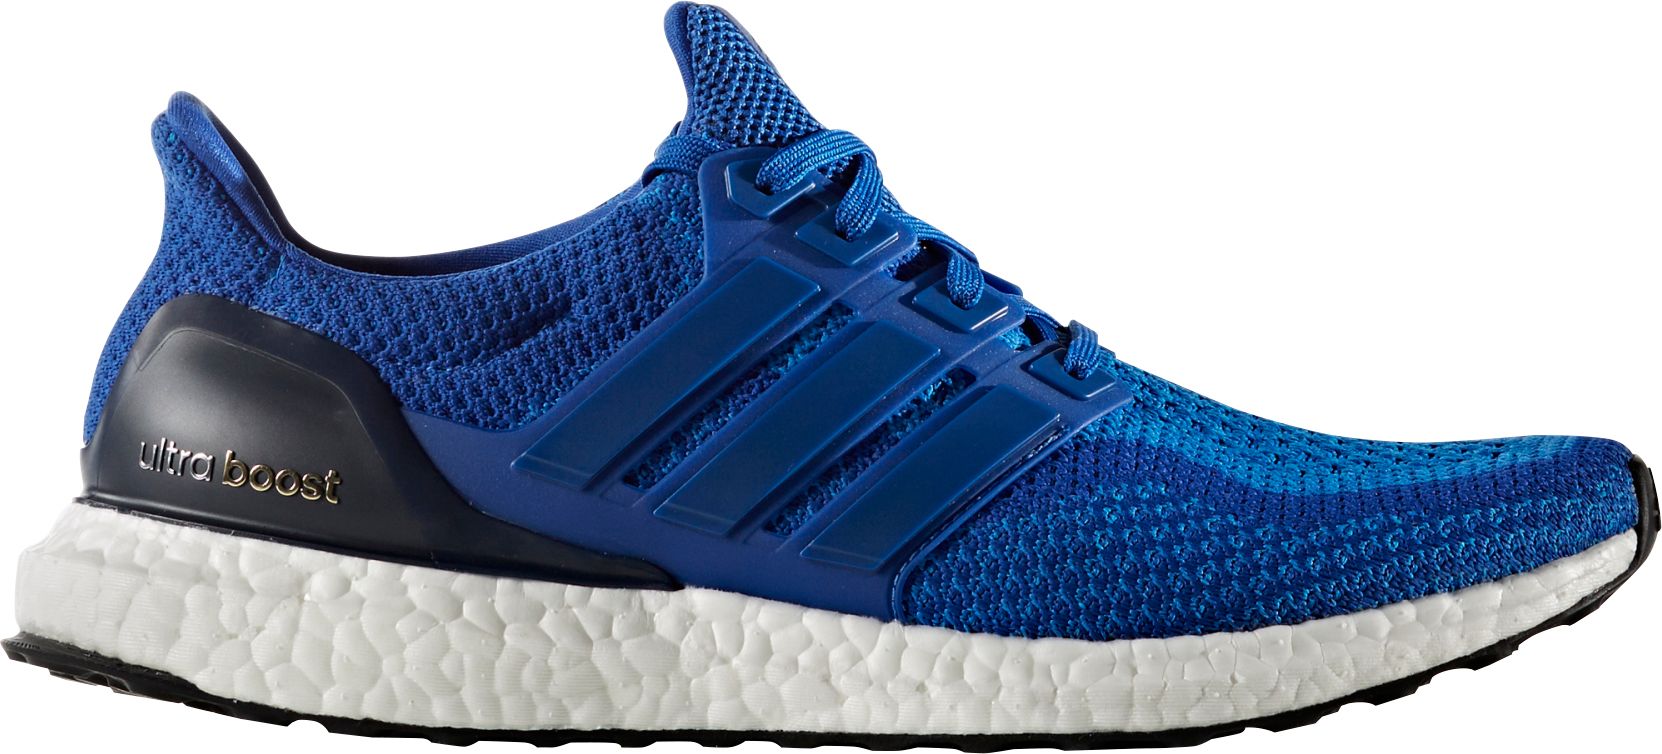 adidas Men's Ultra Boost Running Shoes | DICK'S Sporting Goods